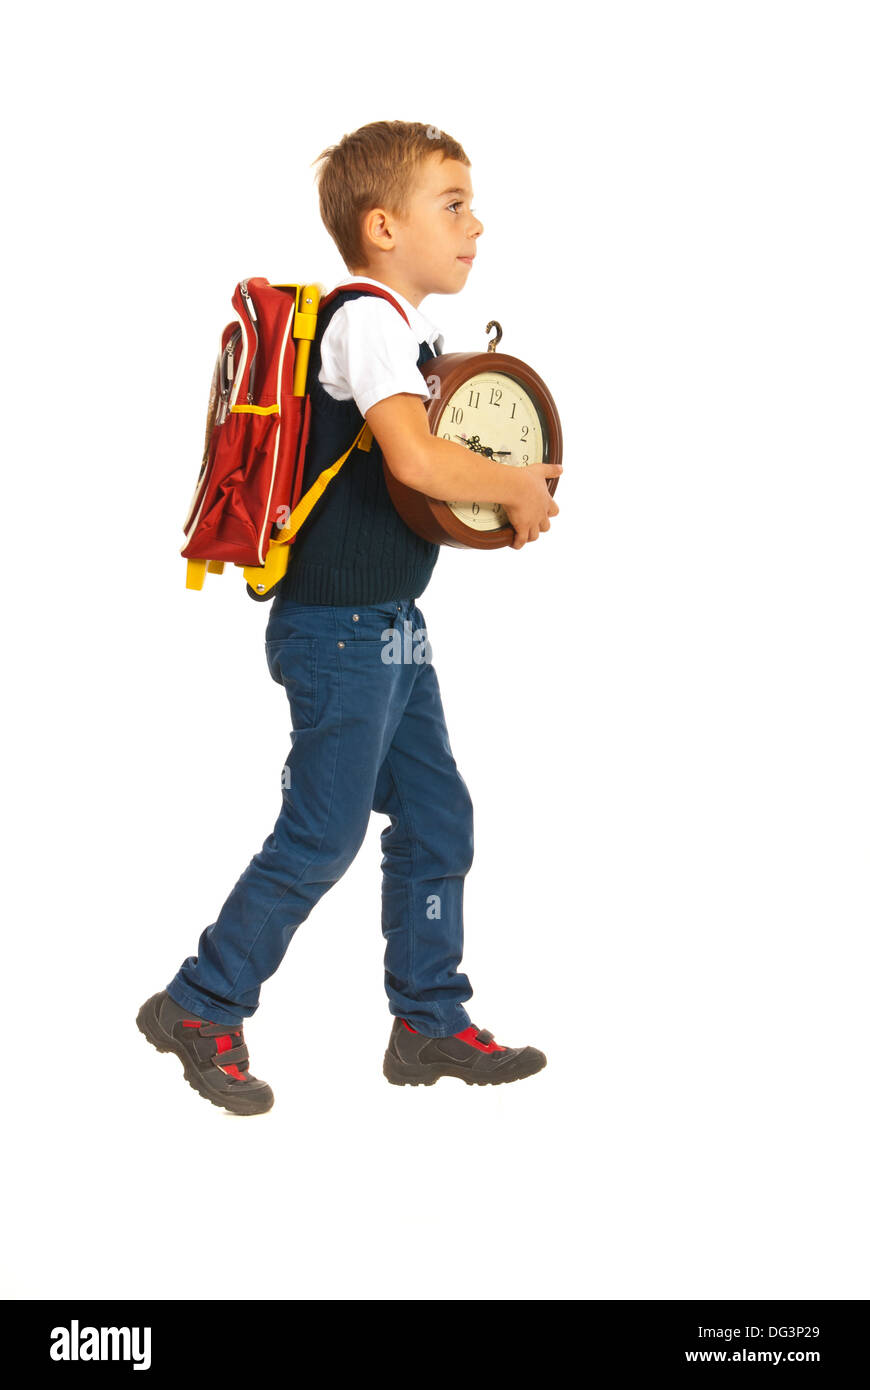 Schoolboy walking to school and holding clock isolated on white background Stock Photo